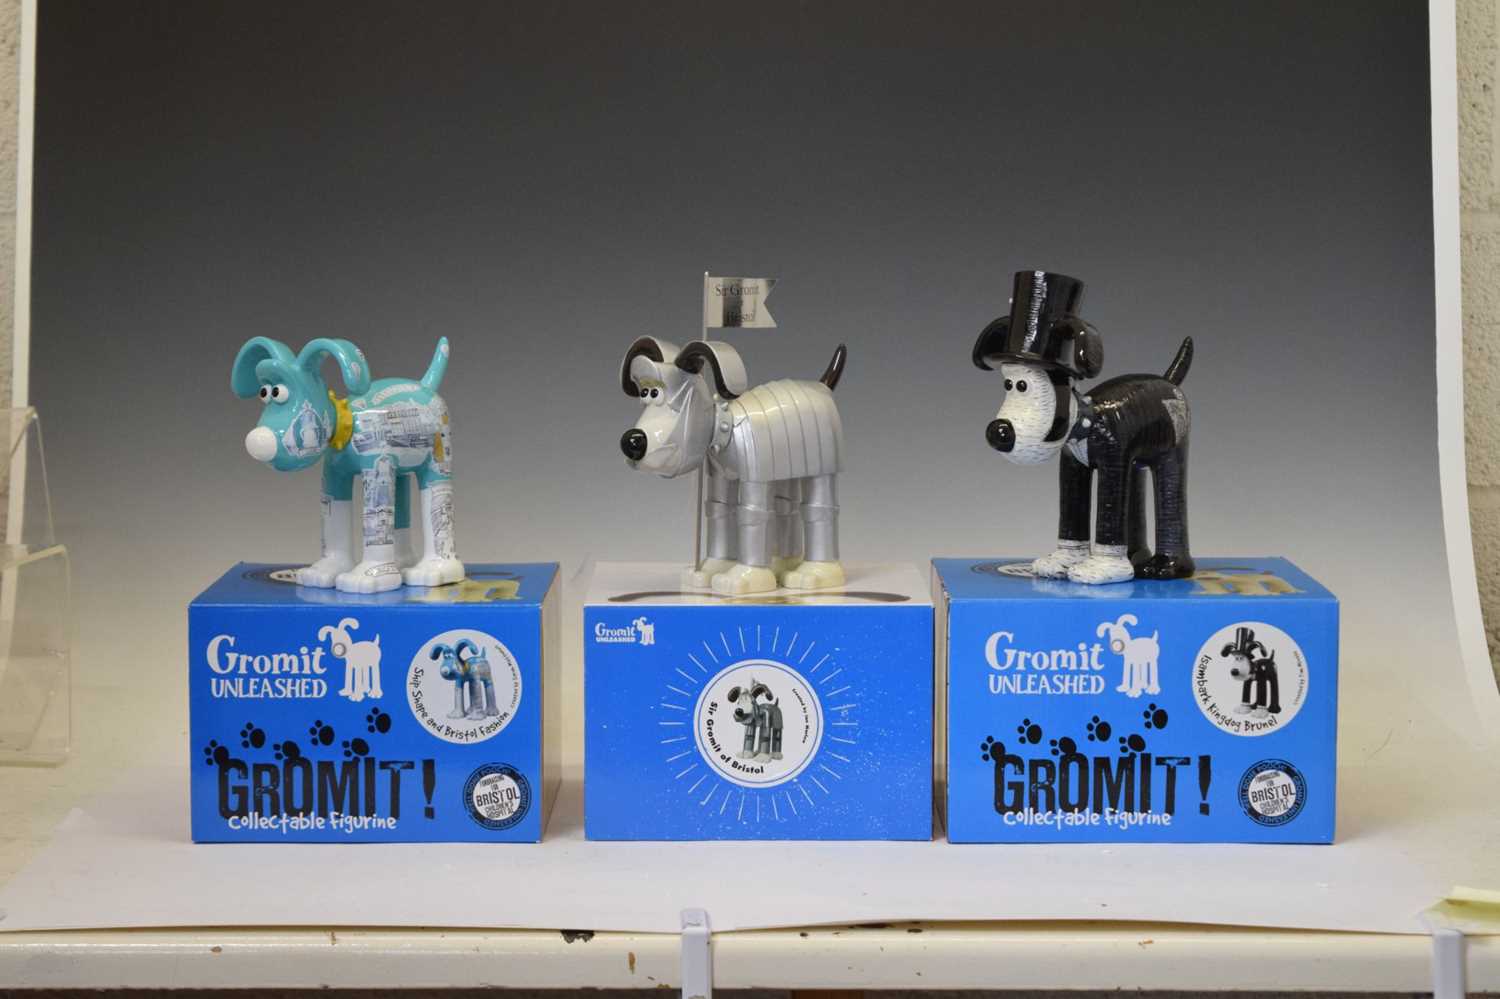 Aardman/Wallace and Gromit - 'Gromit Unleashed' figures - Image 2 of 11